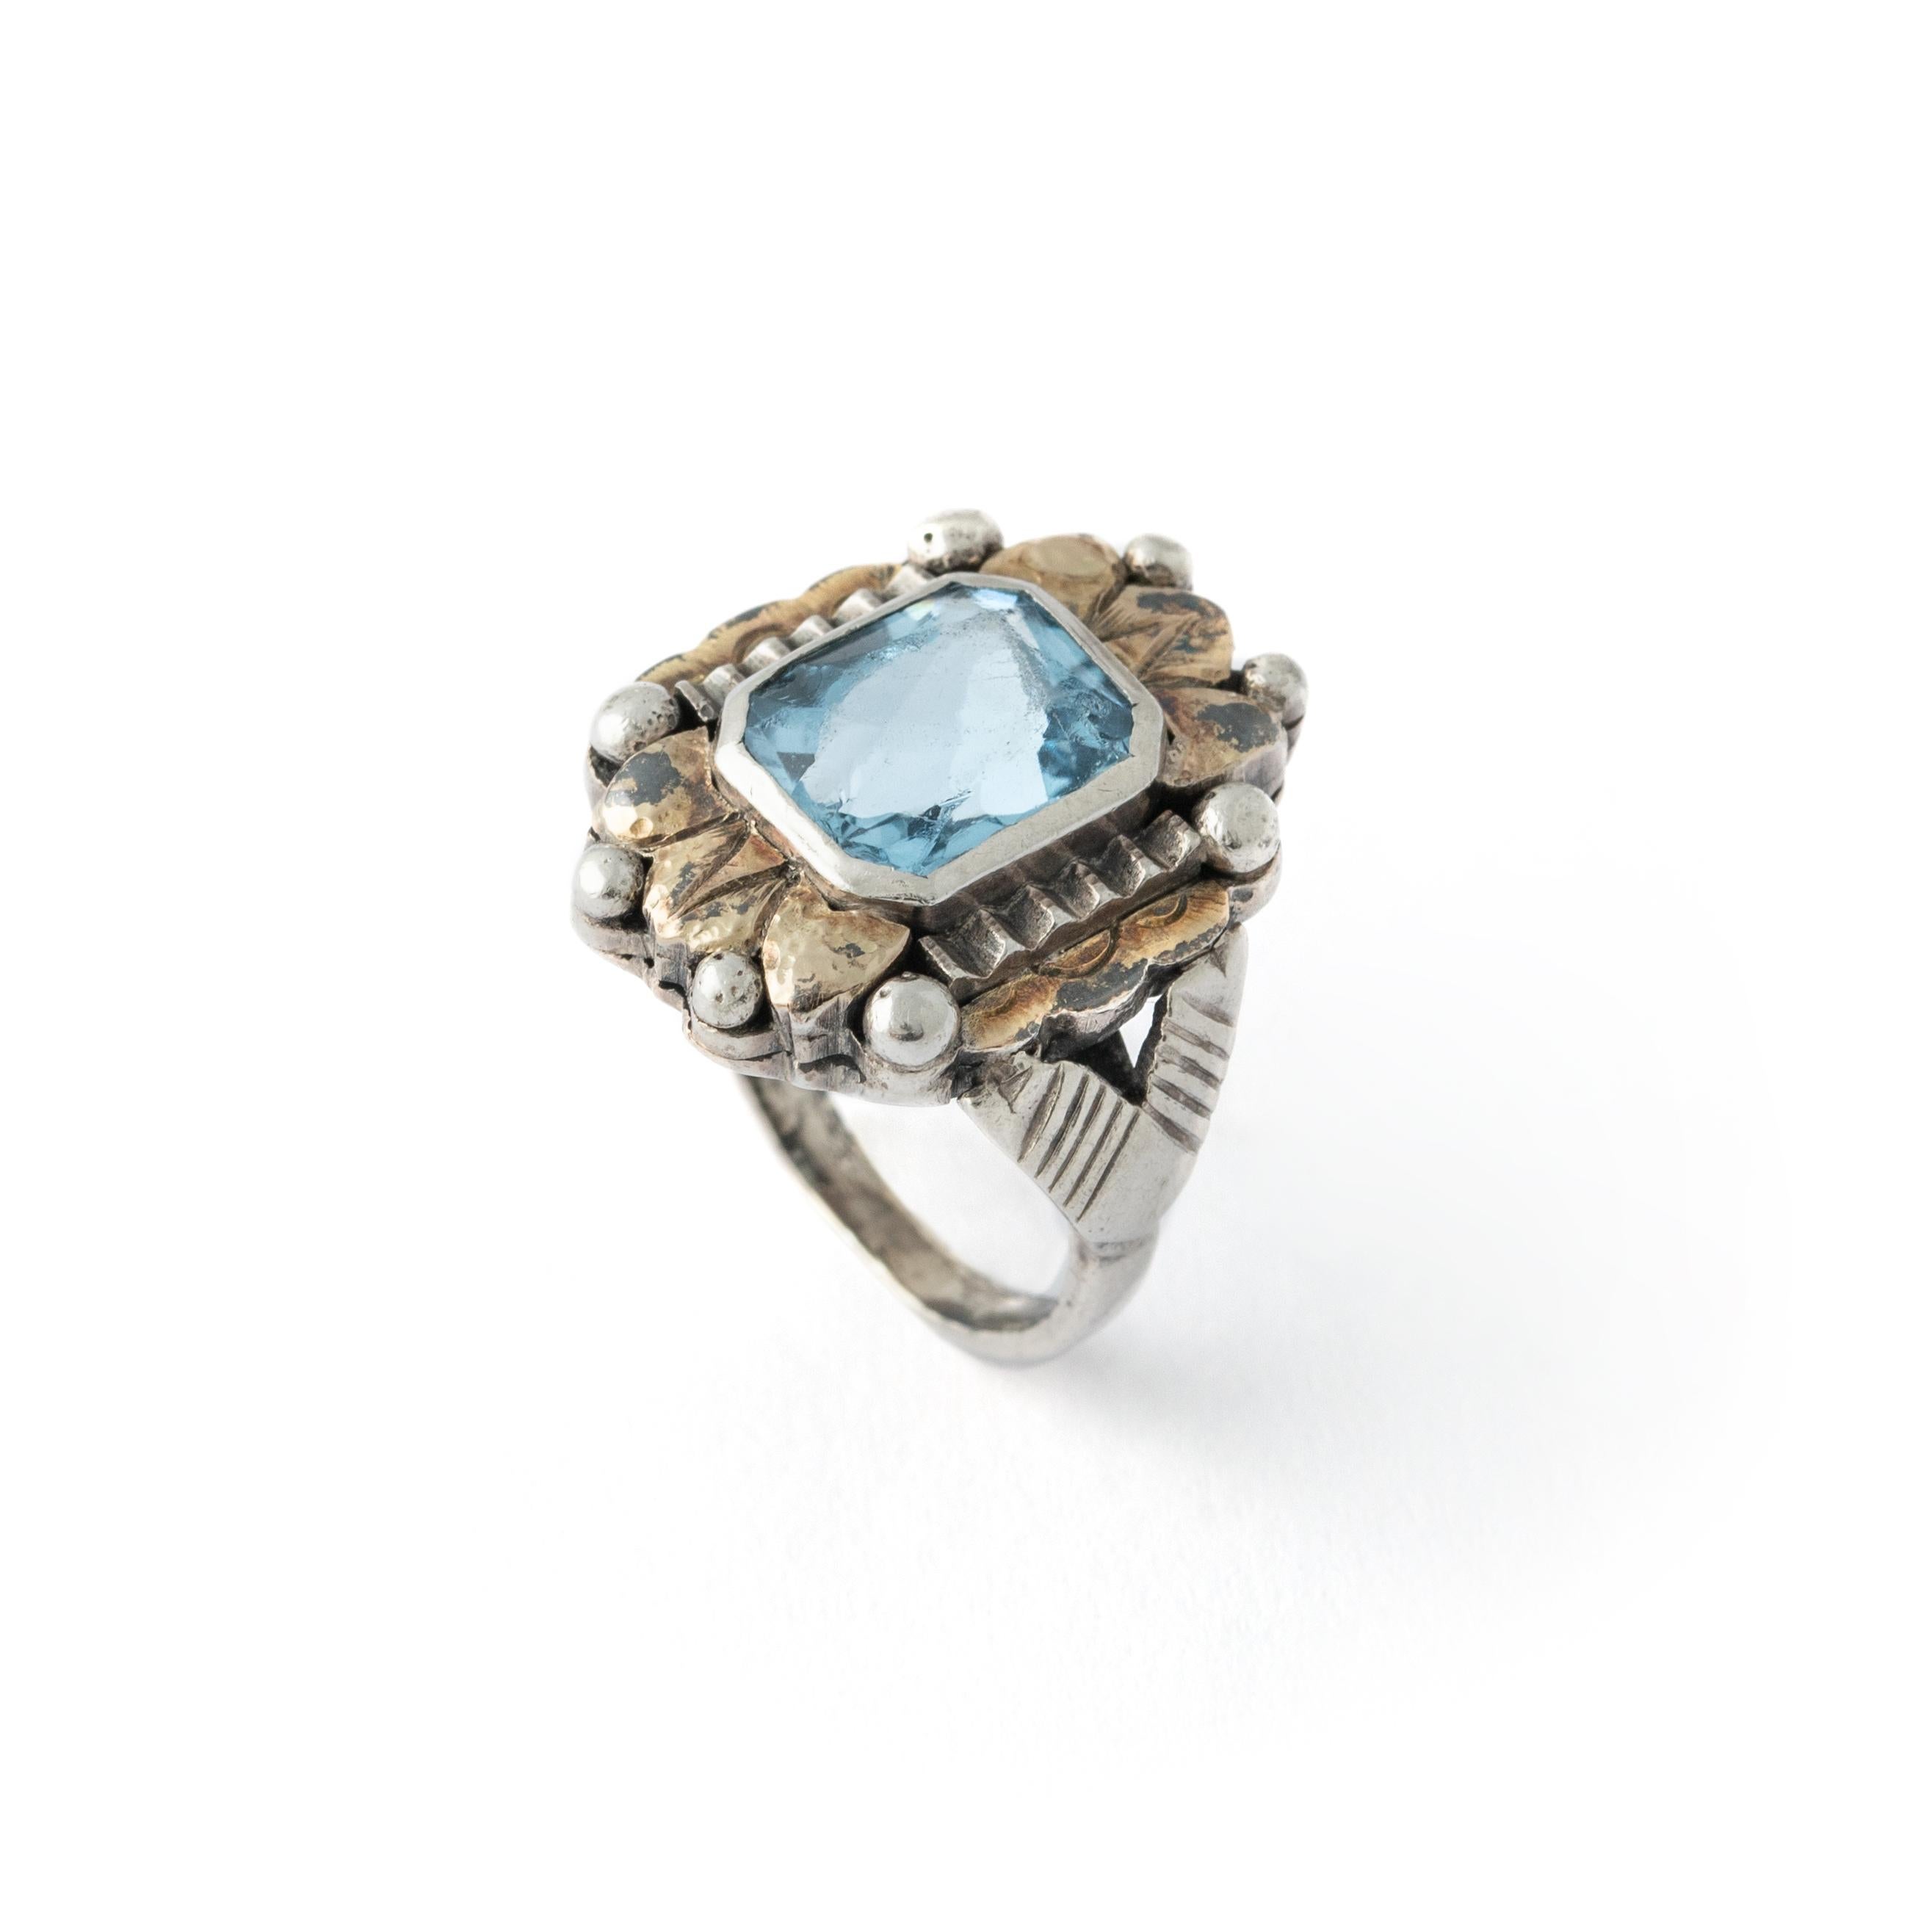 Aquamarine Vintage Silver Ring.
Late 20th Century.
Ring Size: approximately 5.

Total weight: 7.21 grams.